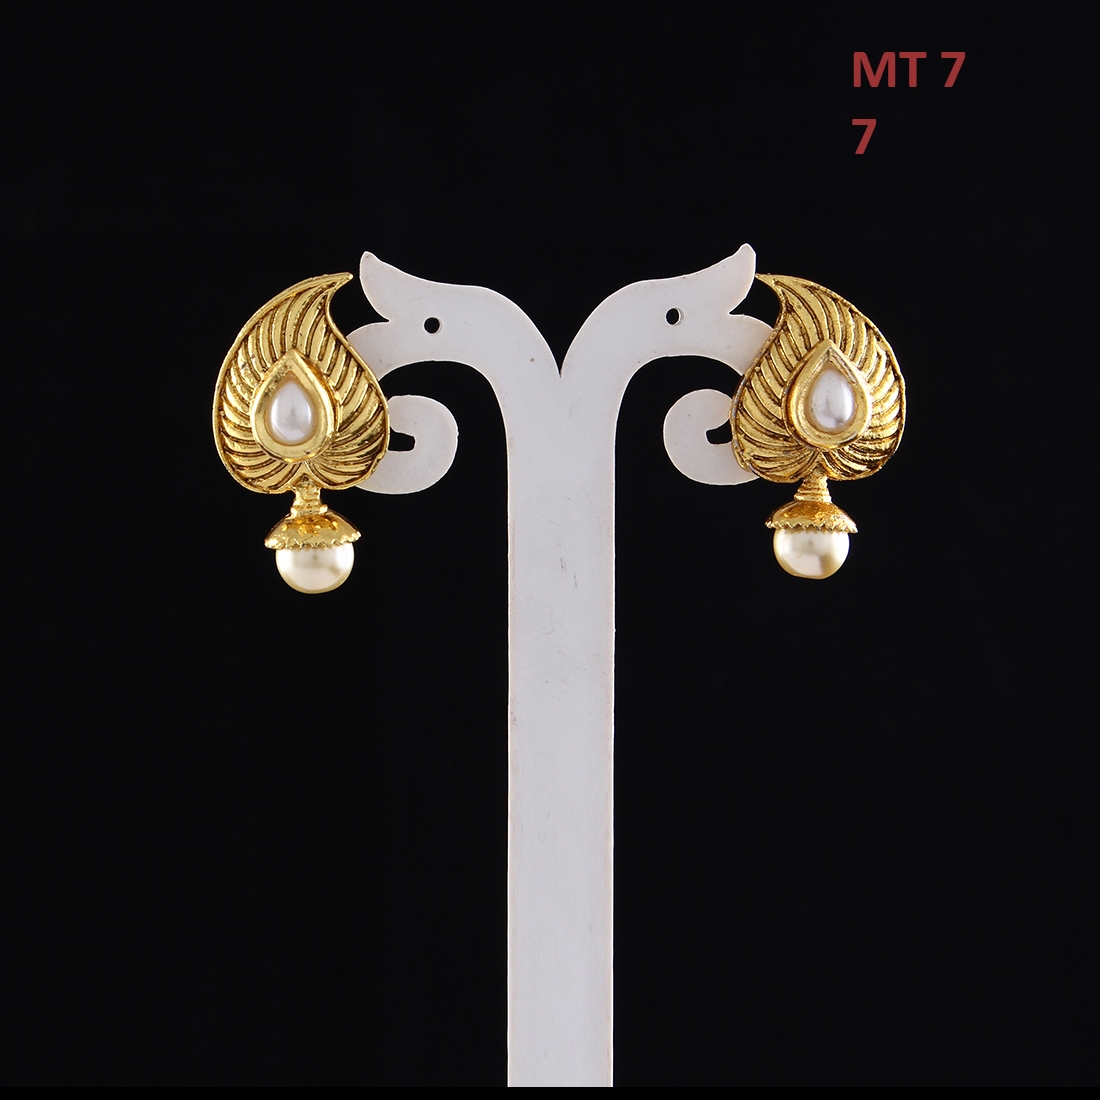 55Carat | Pretty Jhumki Earrings Gold Plated Crystal, Cz, Pearl Crystal, Cz, Pearl For Women Girls Ladies 0